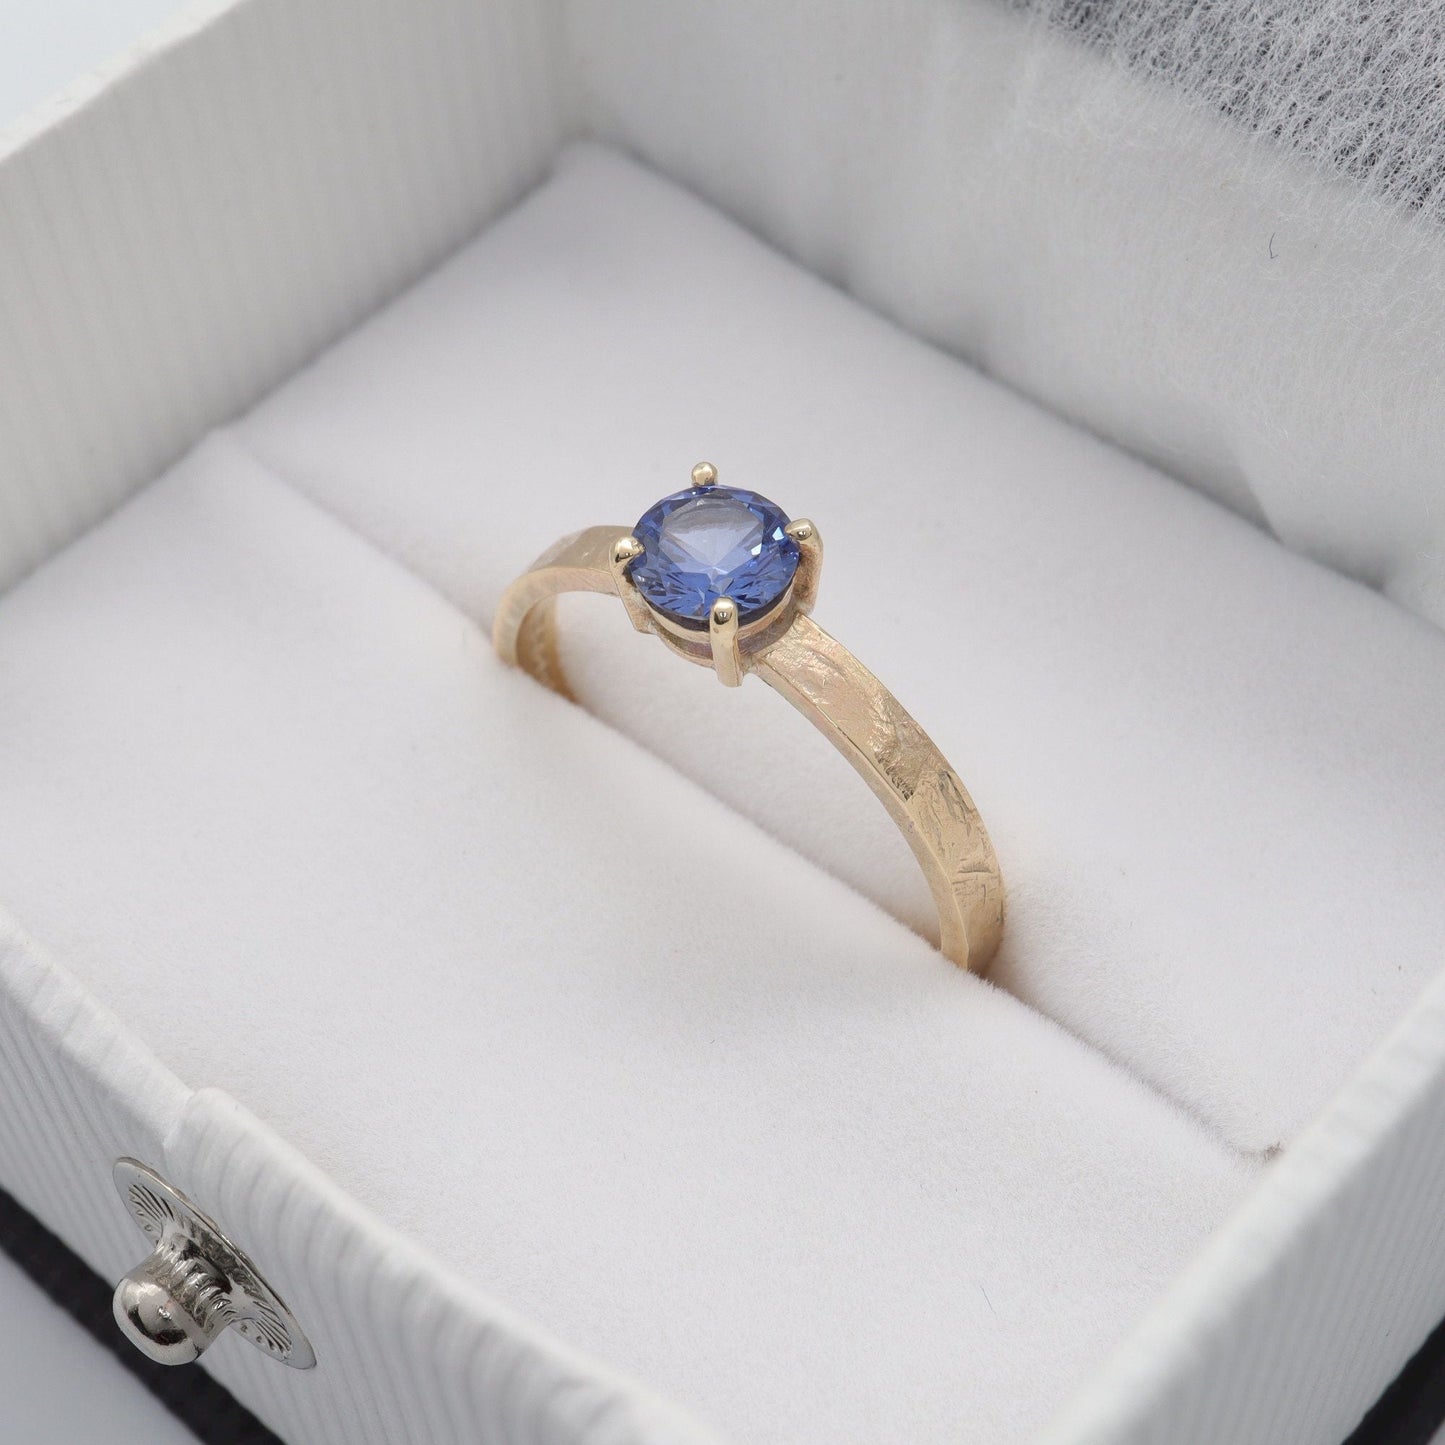 Blue sapphire solitaire gold ring, Windermere design